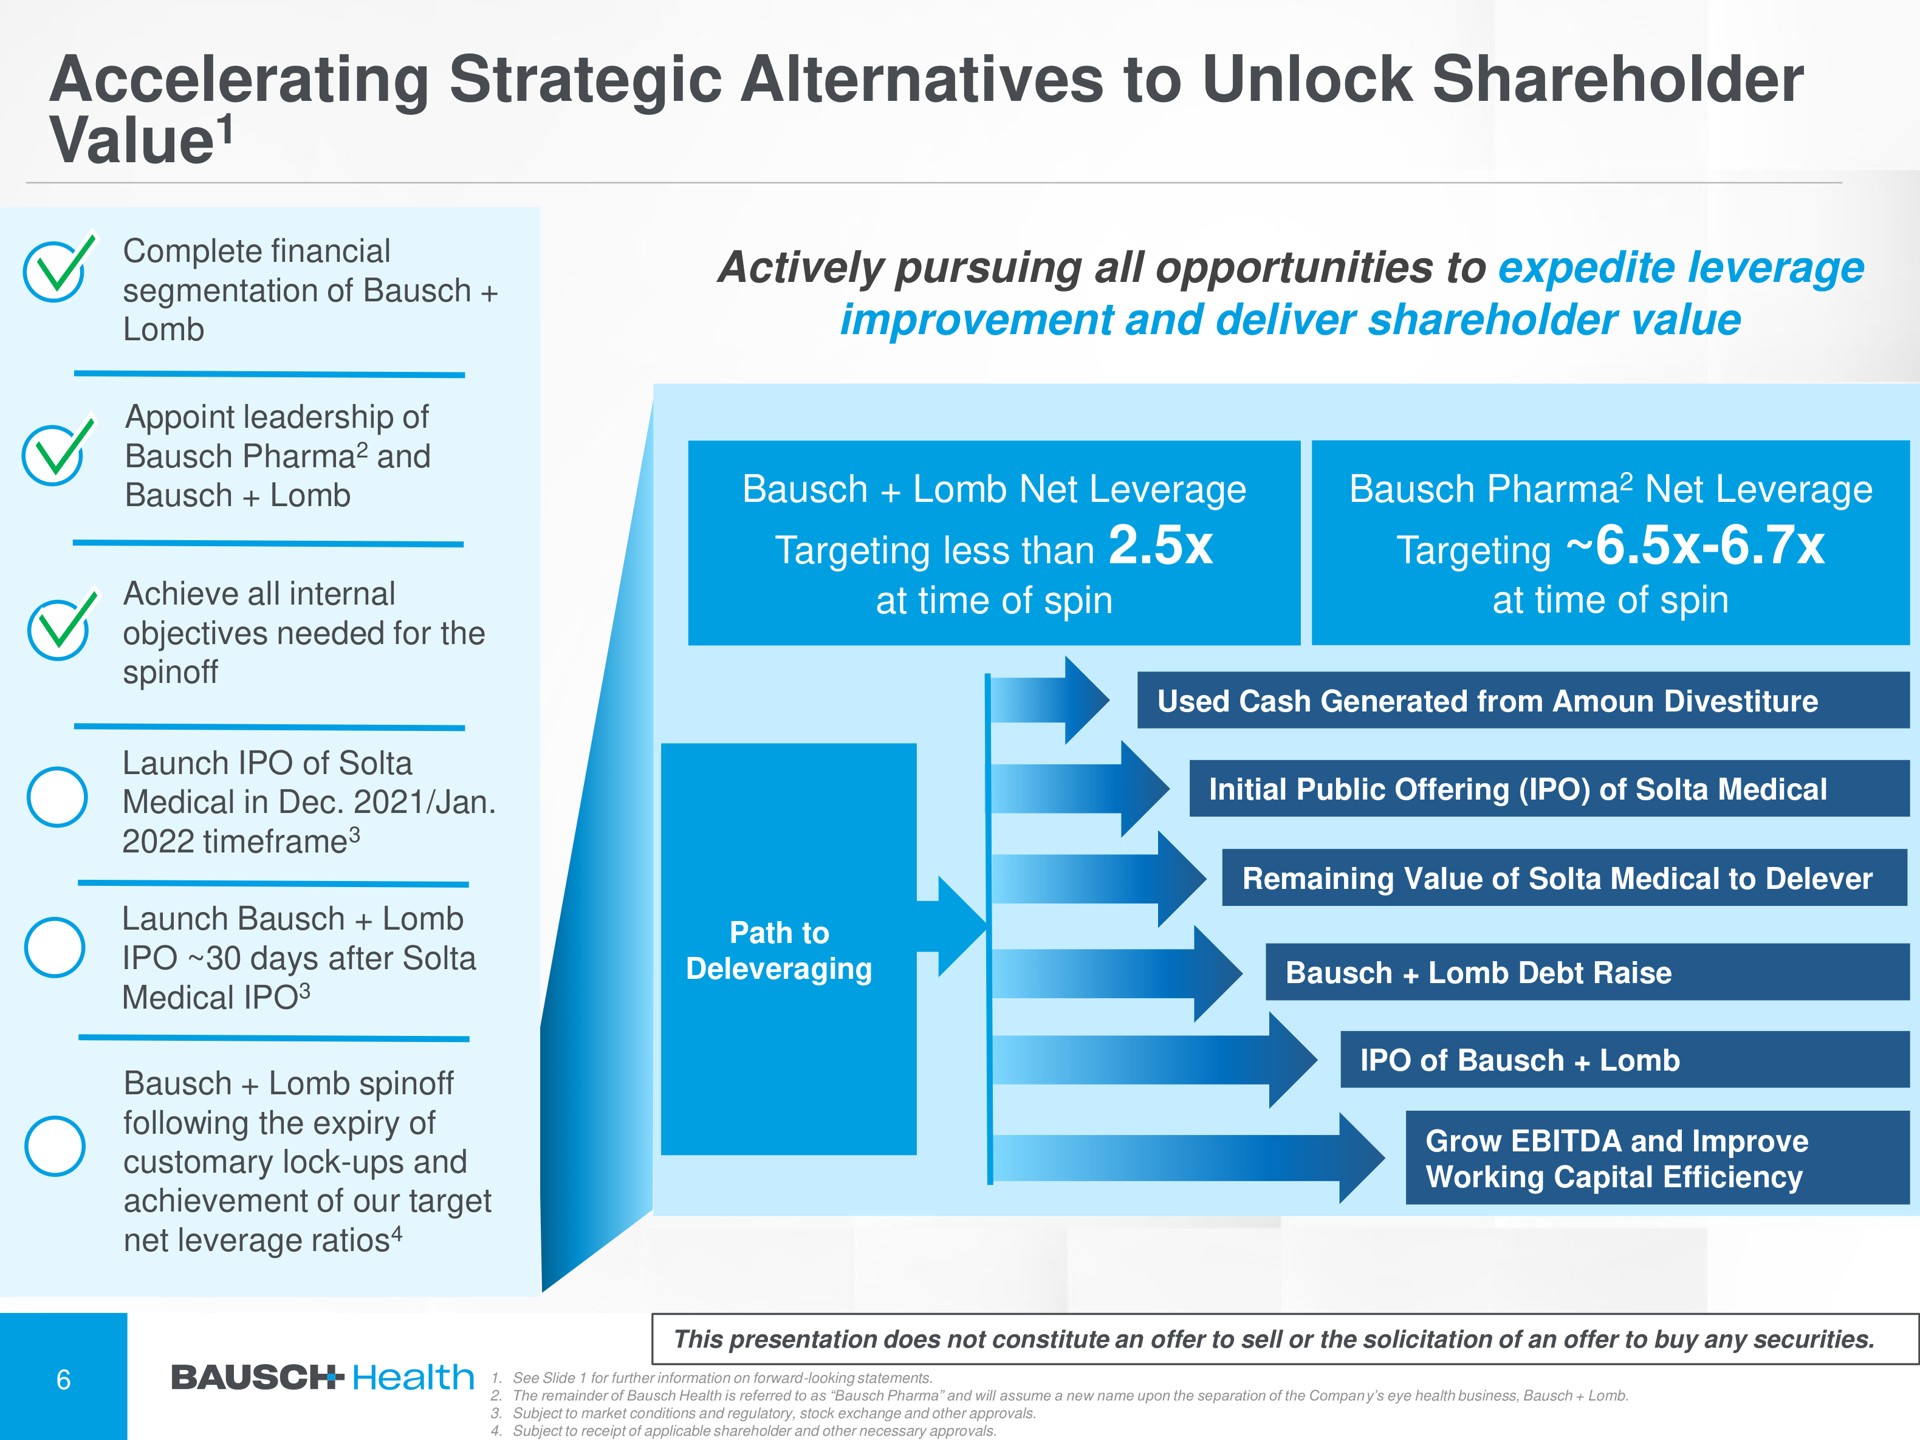 accelerating strategic alternatives to unlock shareholder value actively pursuing all opportunities to expedite leverage improvement and deliver shareholder value targeting of achieve internal less than olla at time of spin initial public offering of medical sees | Bausch Health Companies